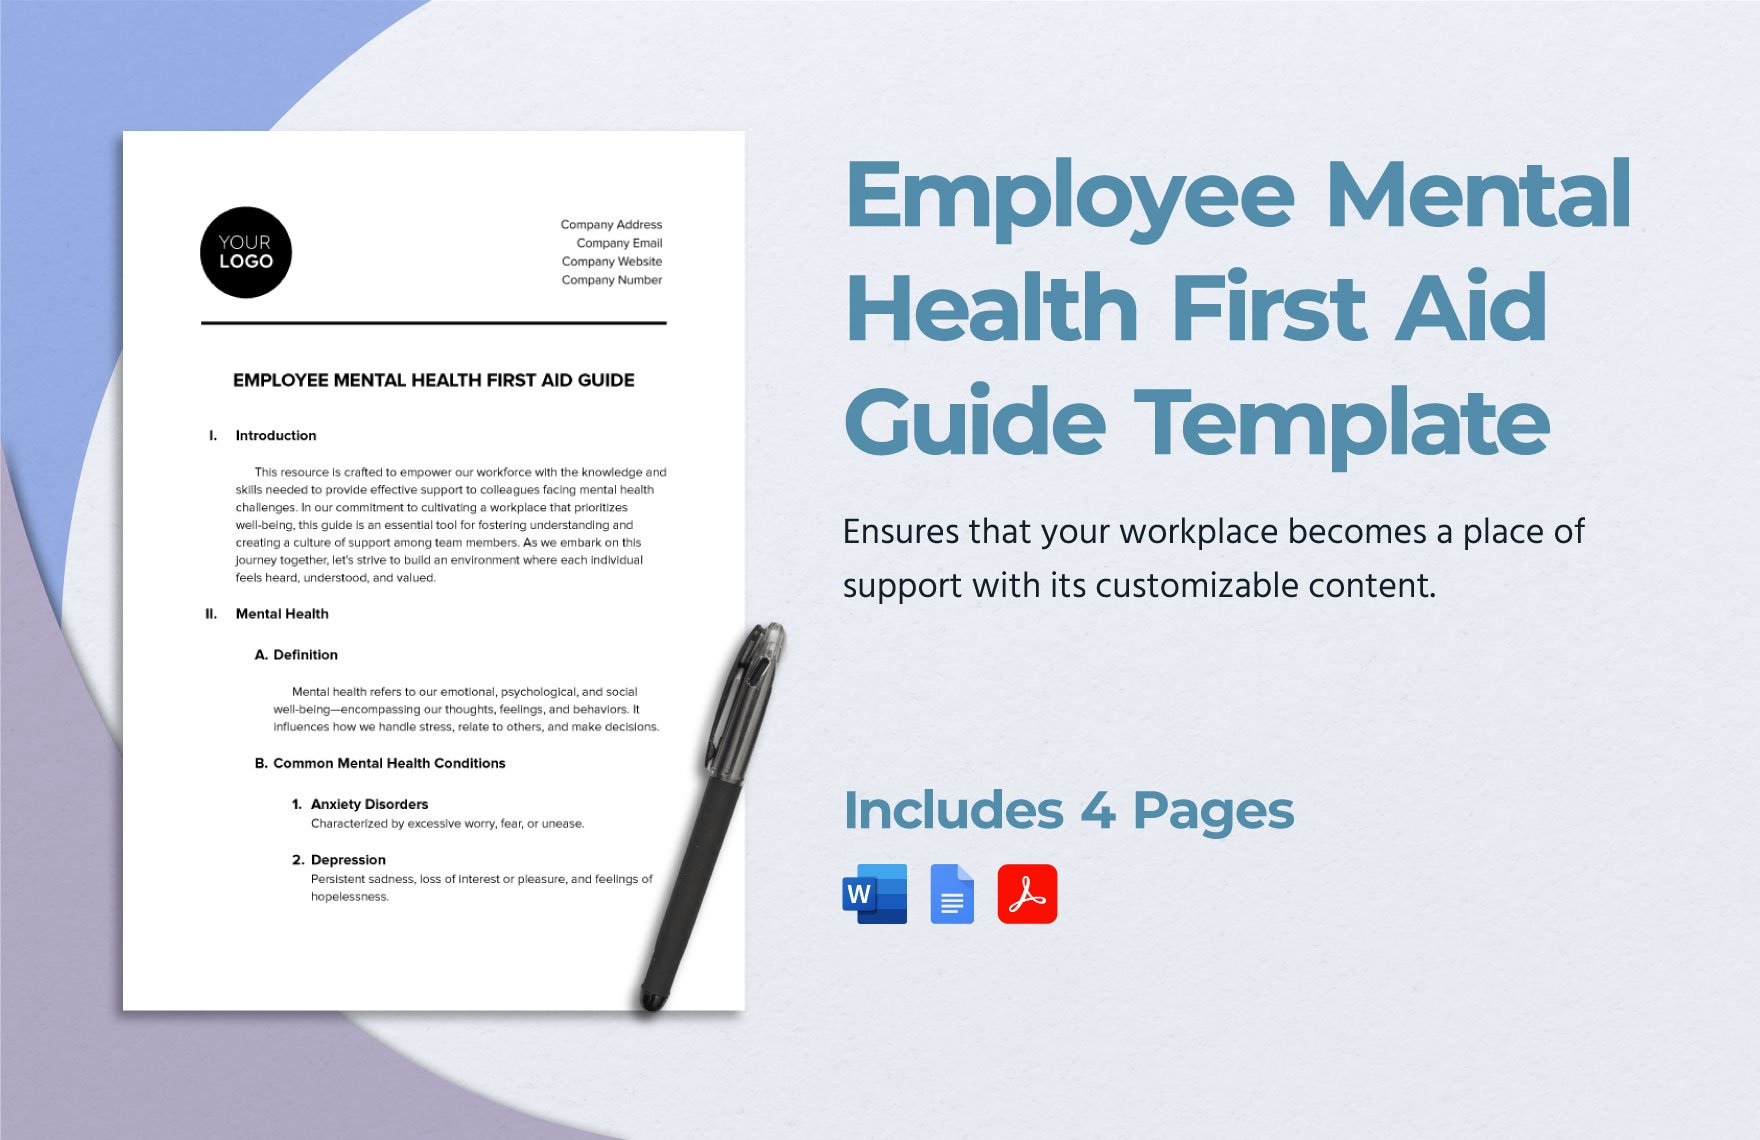 Employee Mental Health First Aid Guide Template